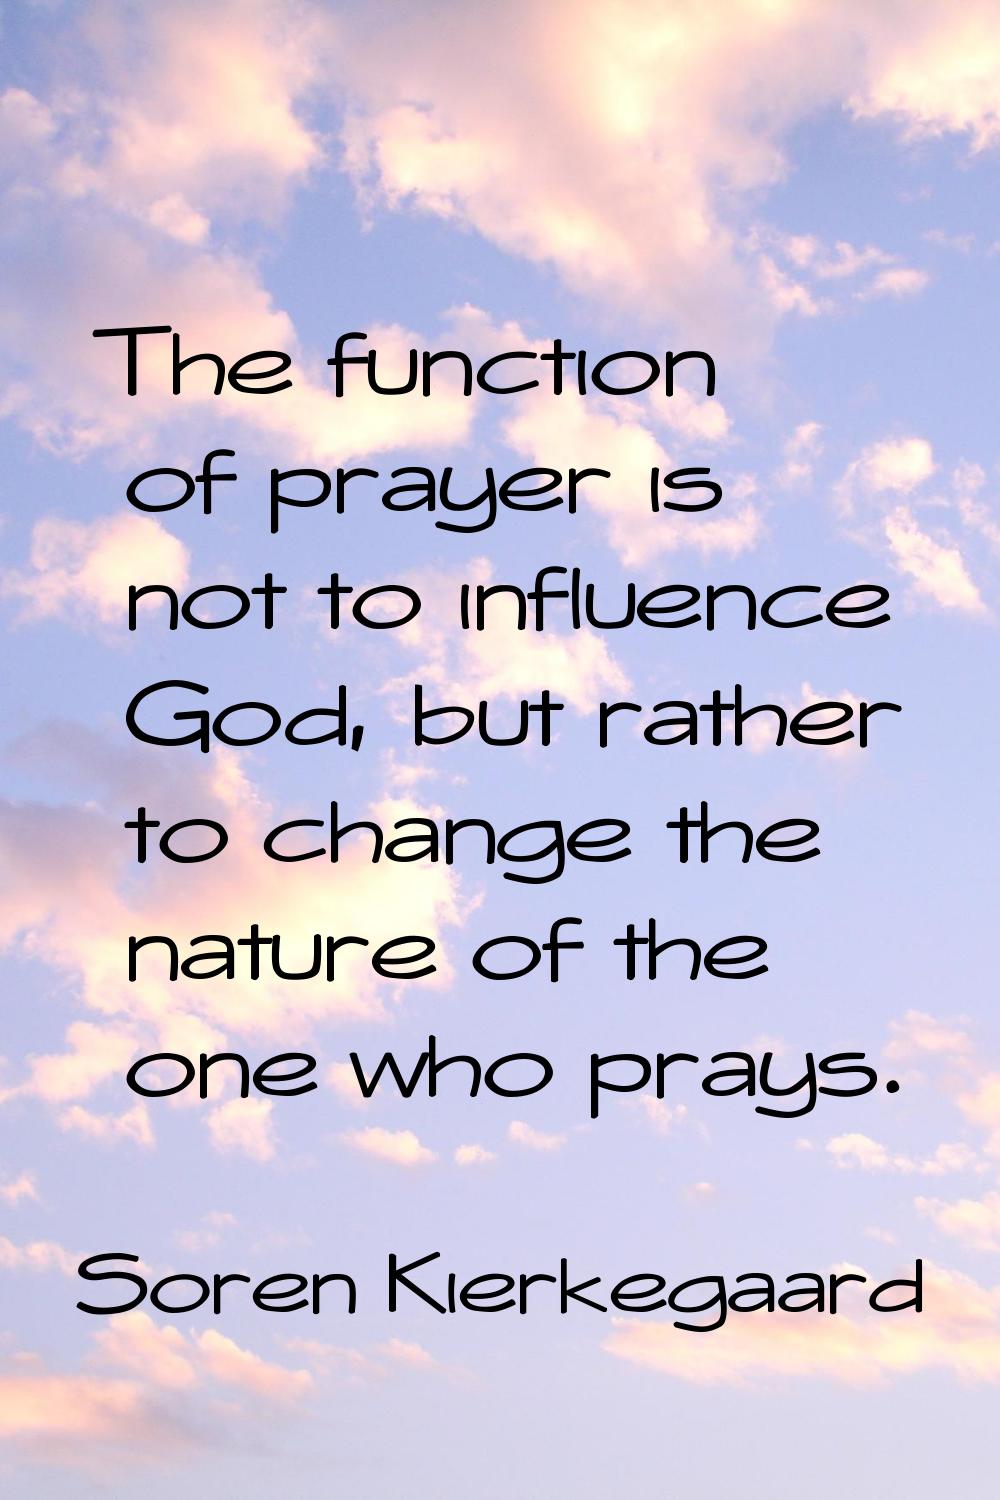 The function of prayer is not to influence God, but rather to change the nature of the one who pray